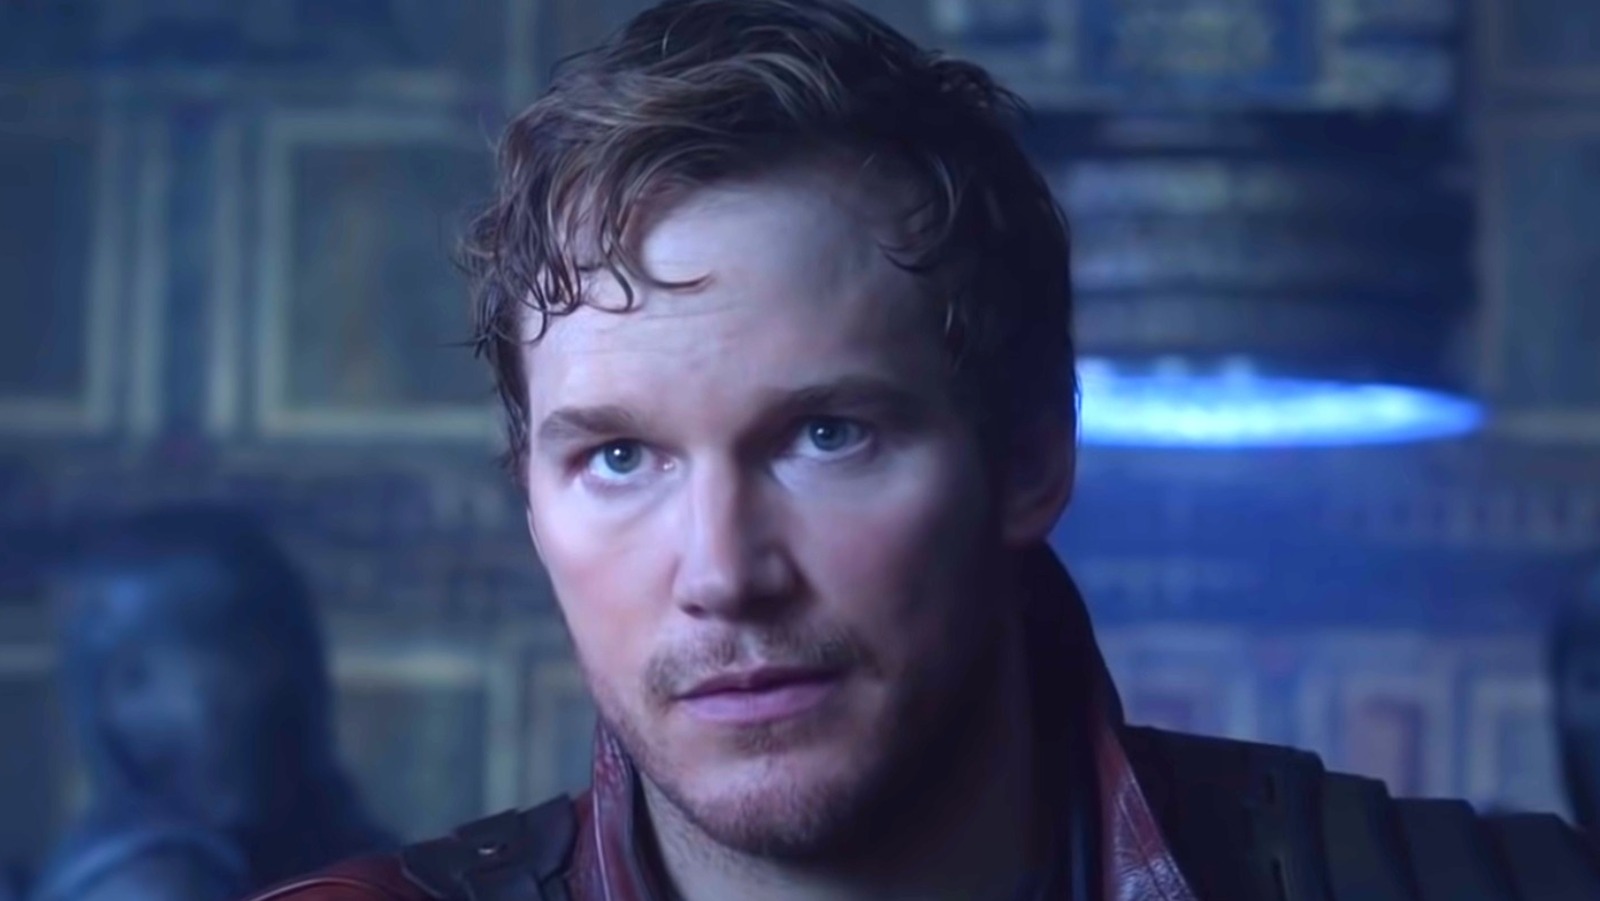 How Chris Pratt Should Really Look As Mario According To Fans